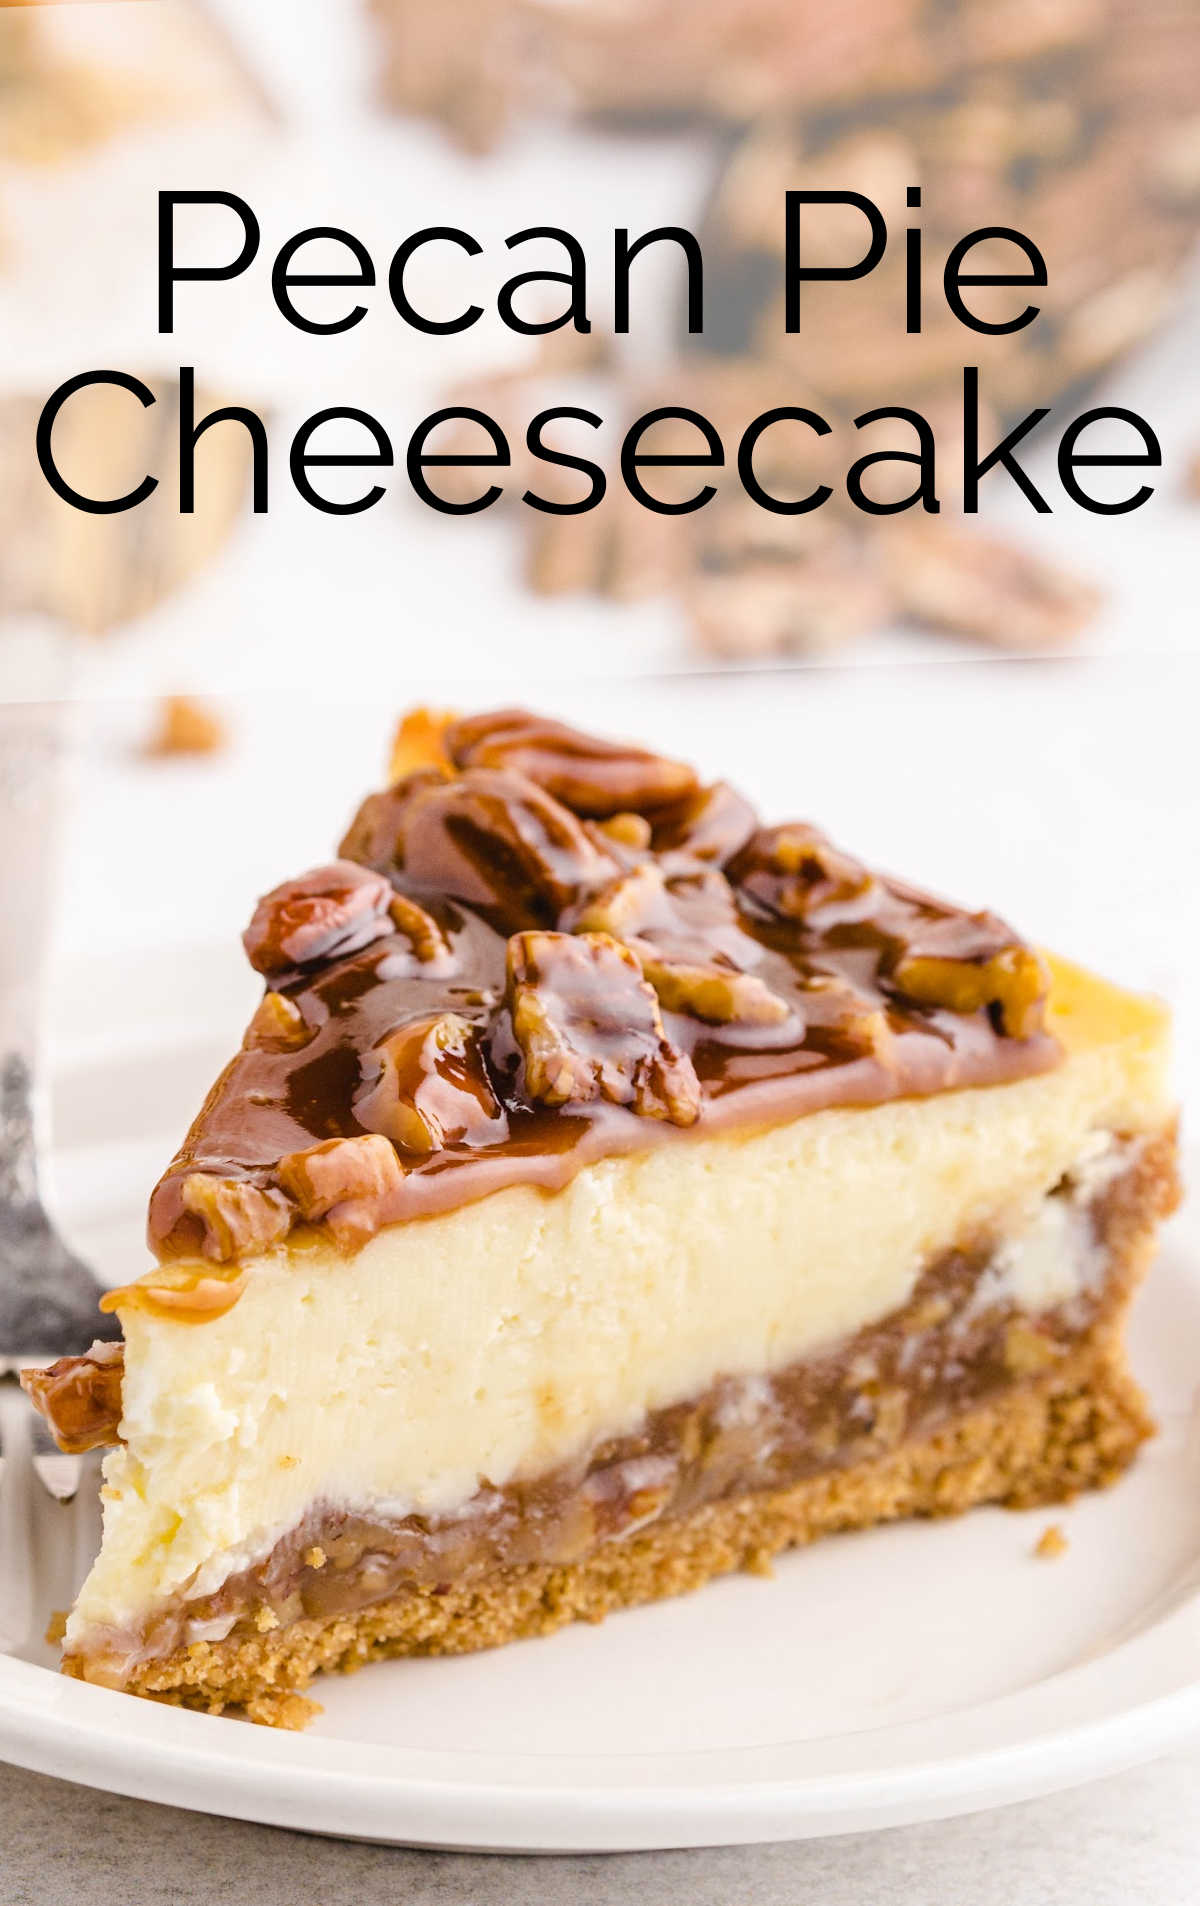 close up shot of a slice of cheesecake topped with pecans and caramel glaze on a plate